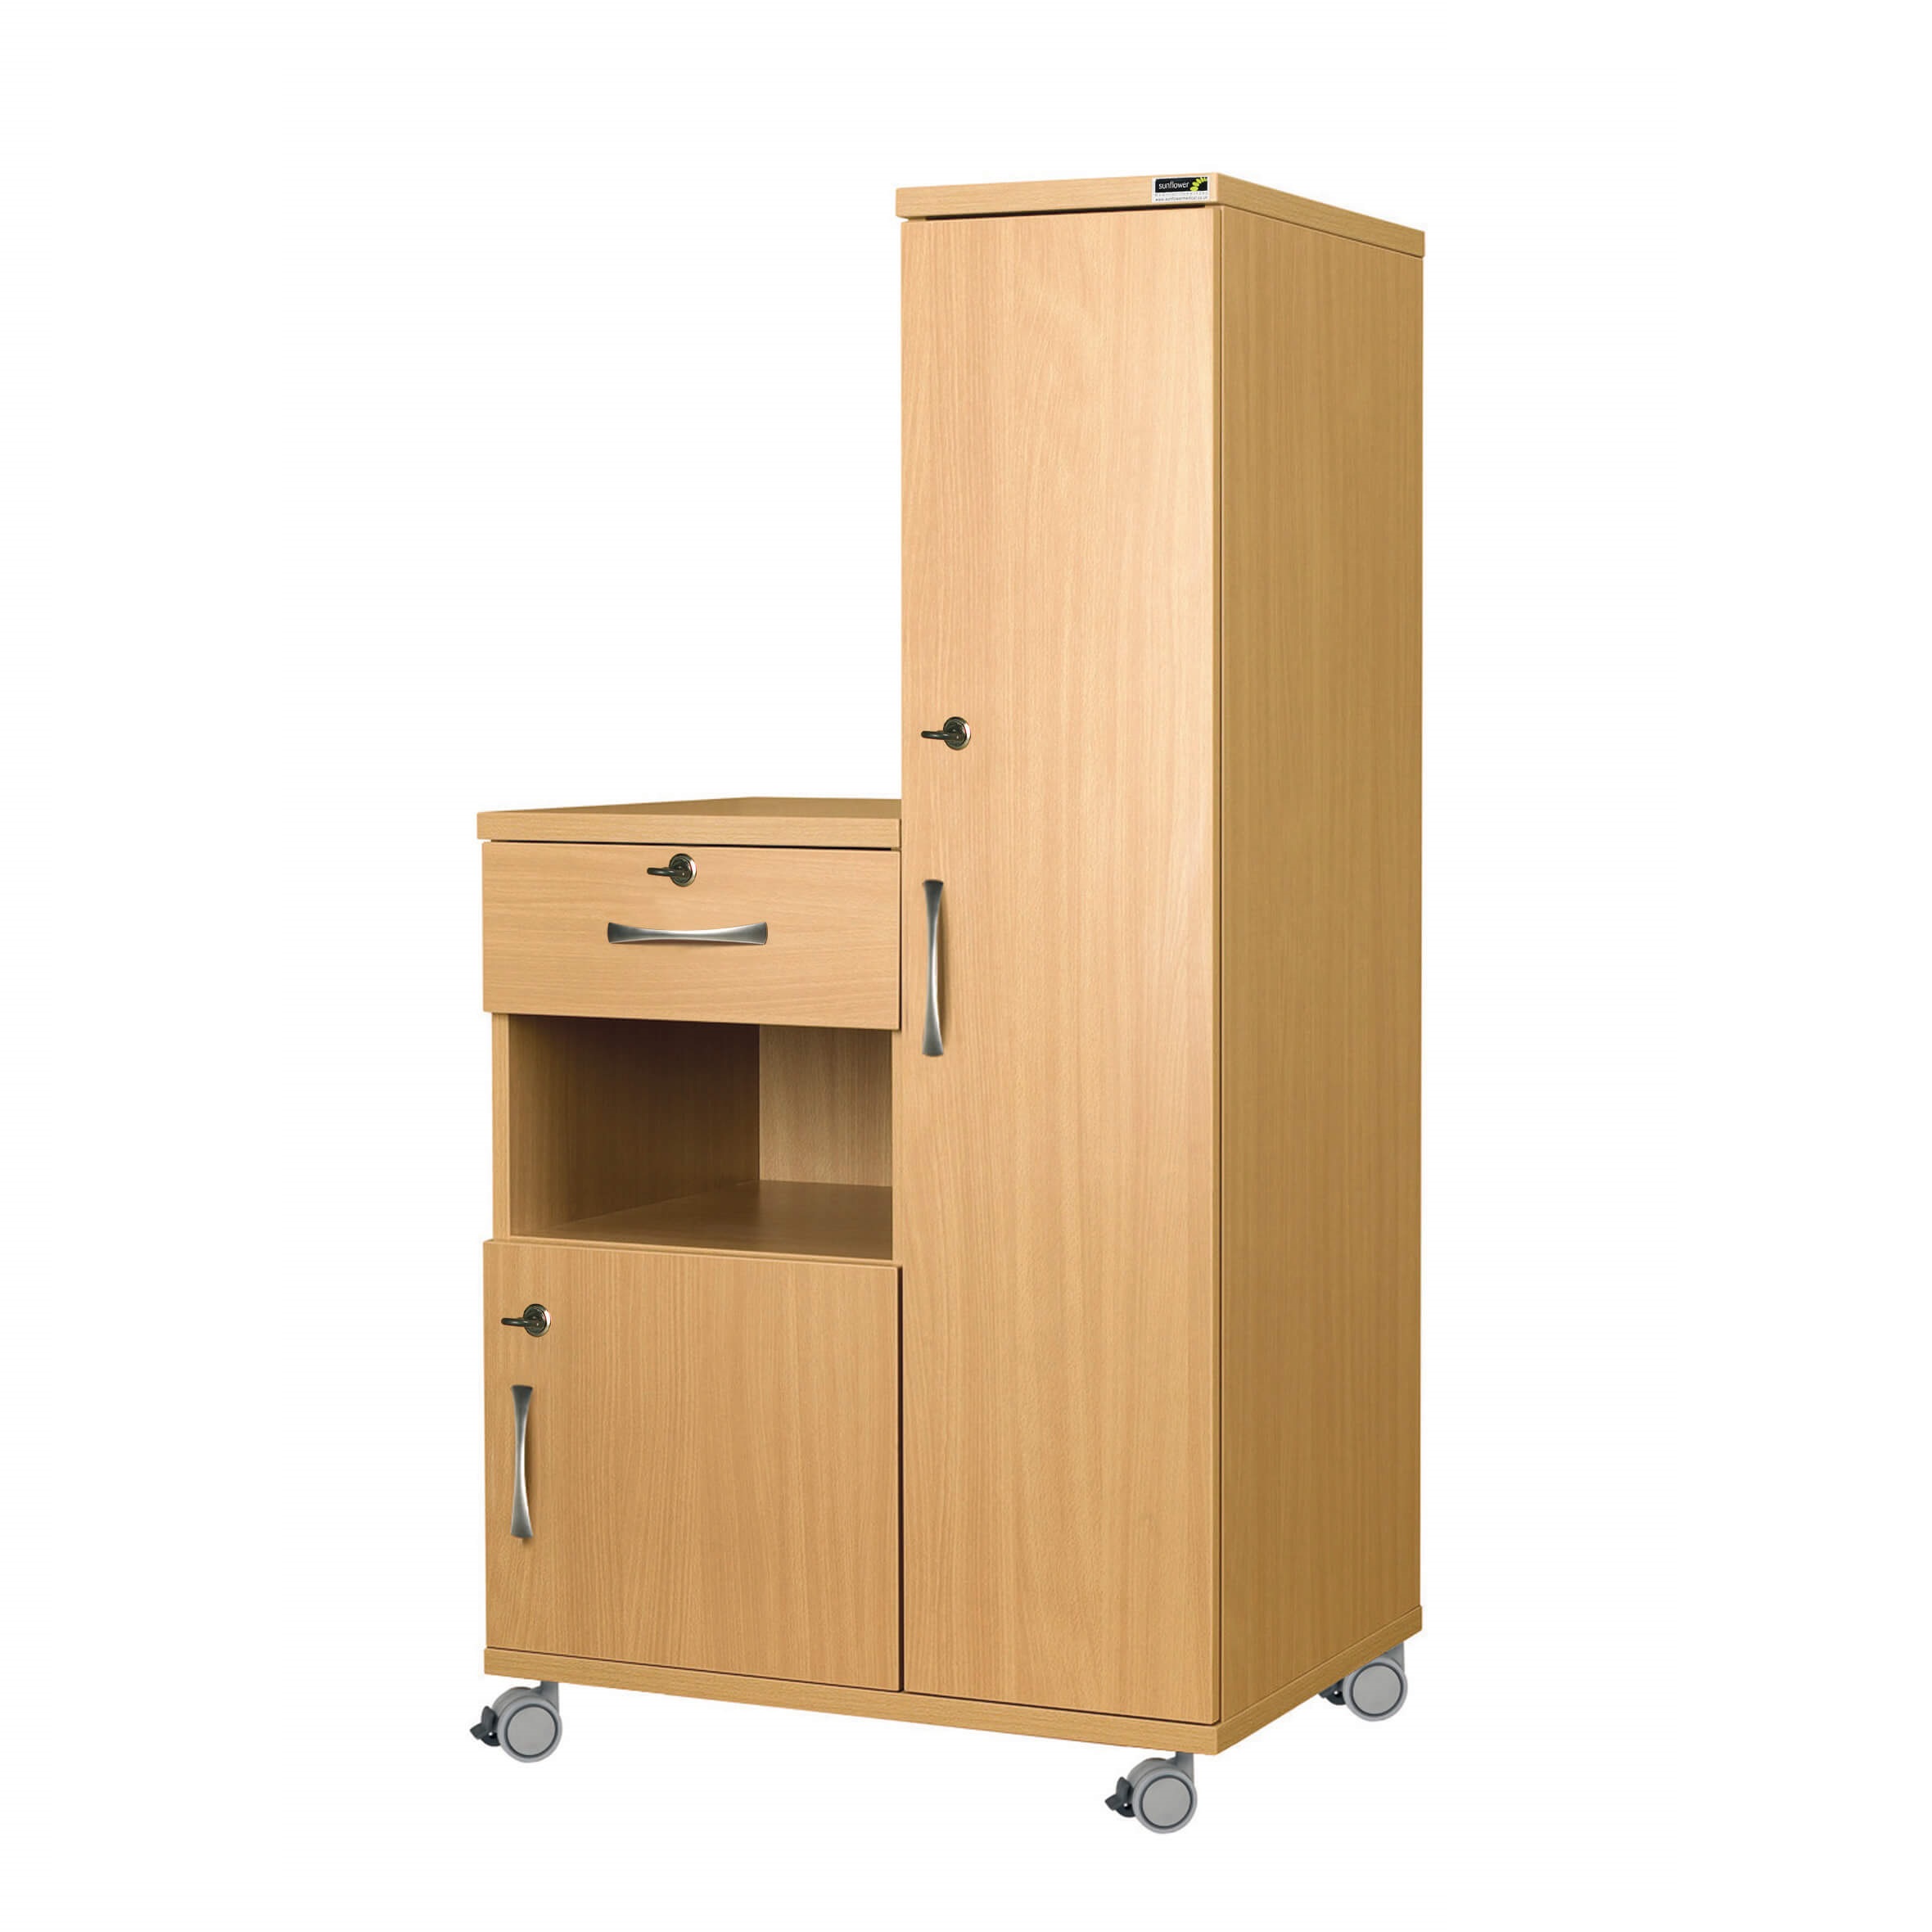 Right Hand Bedside Cabinet Combination Unit with Locks - Laminate Faced MDF Material [Sun-CBHBC5-LFMDF-LOCKS]